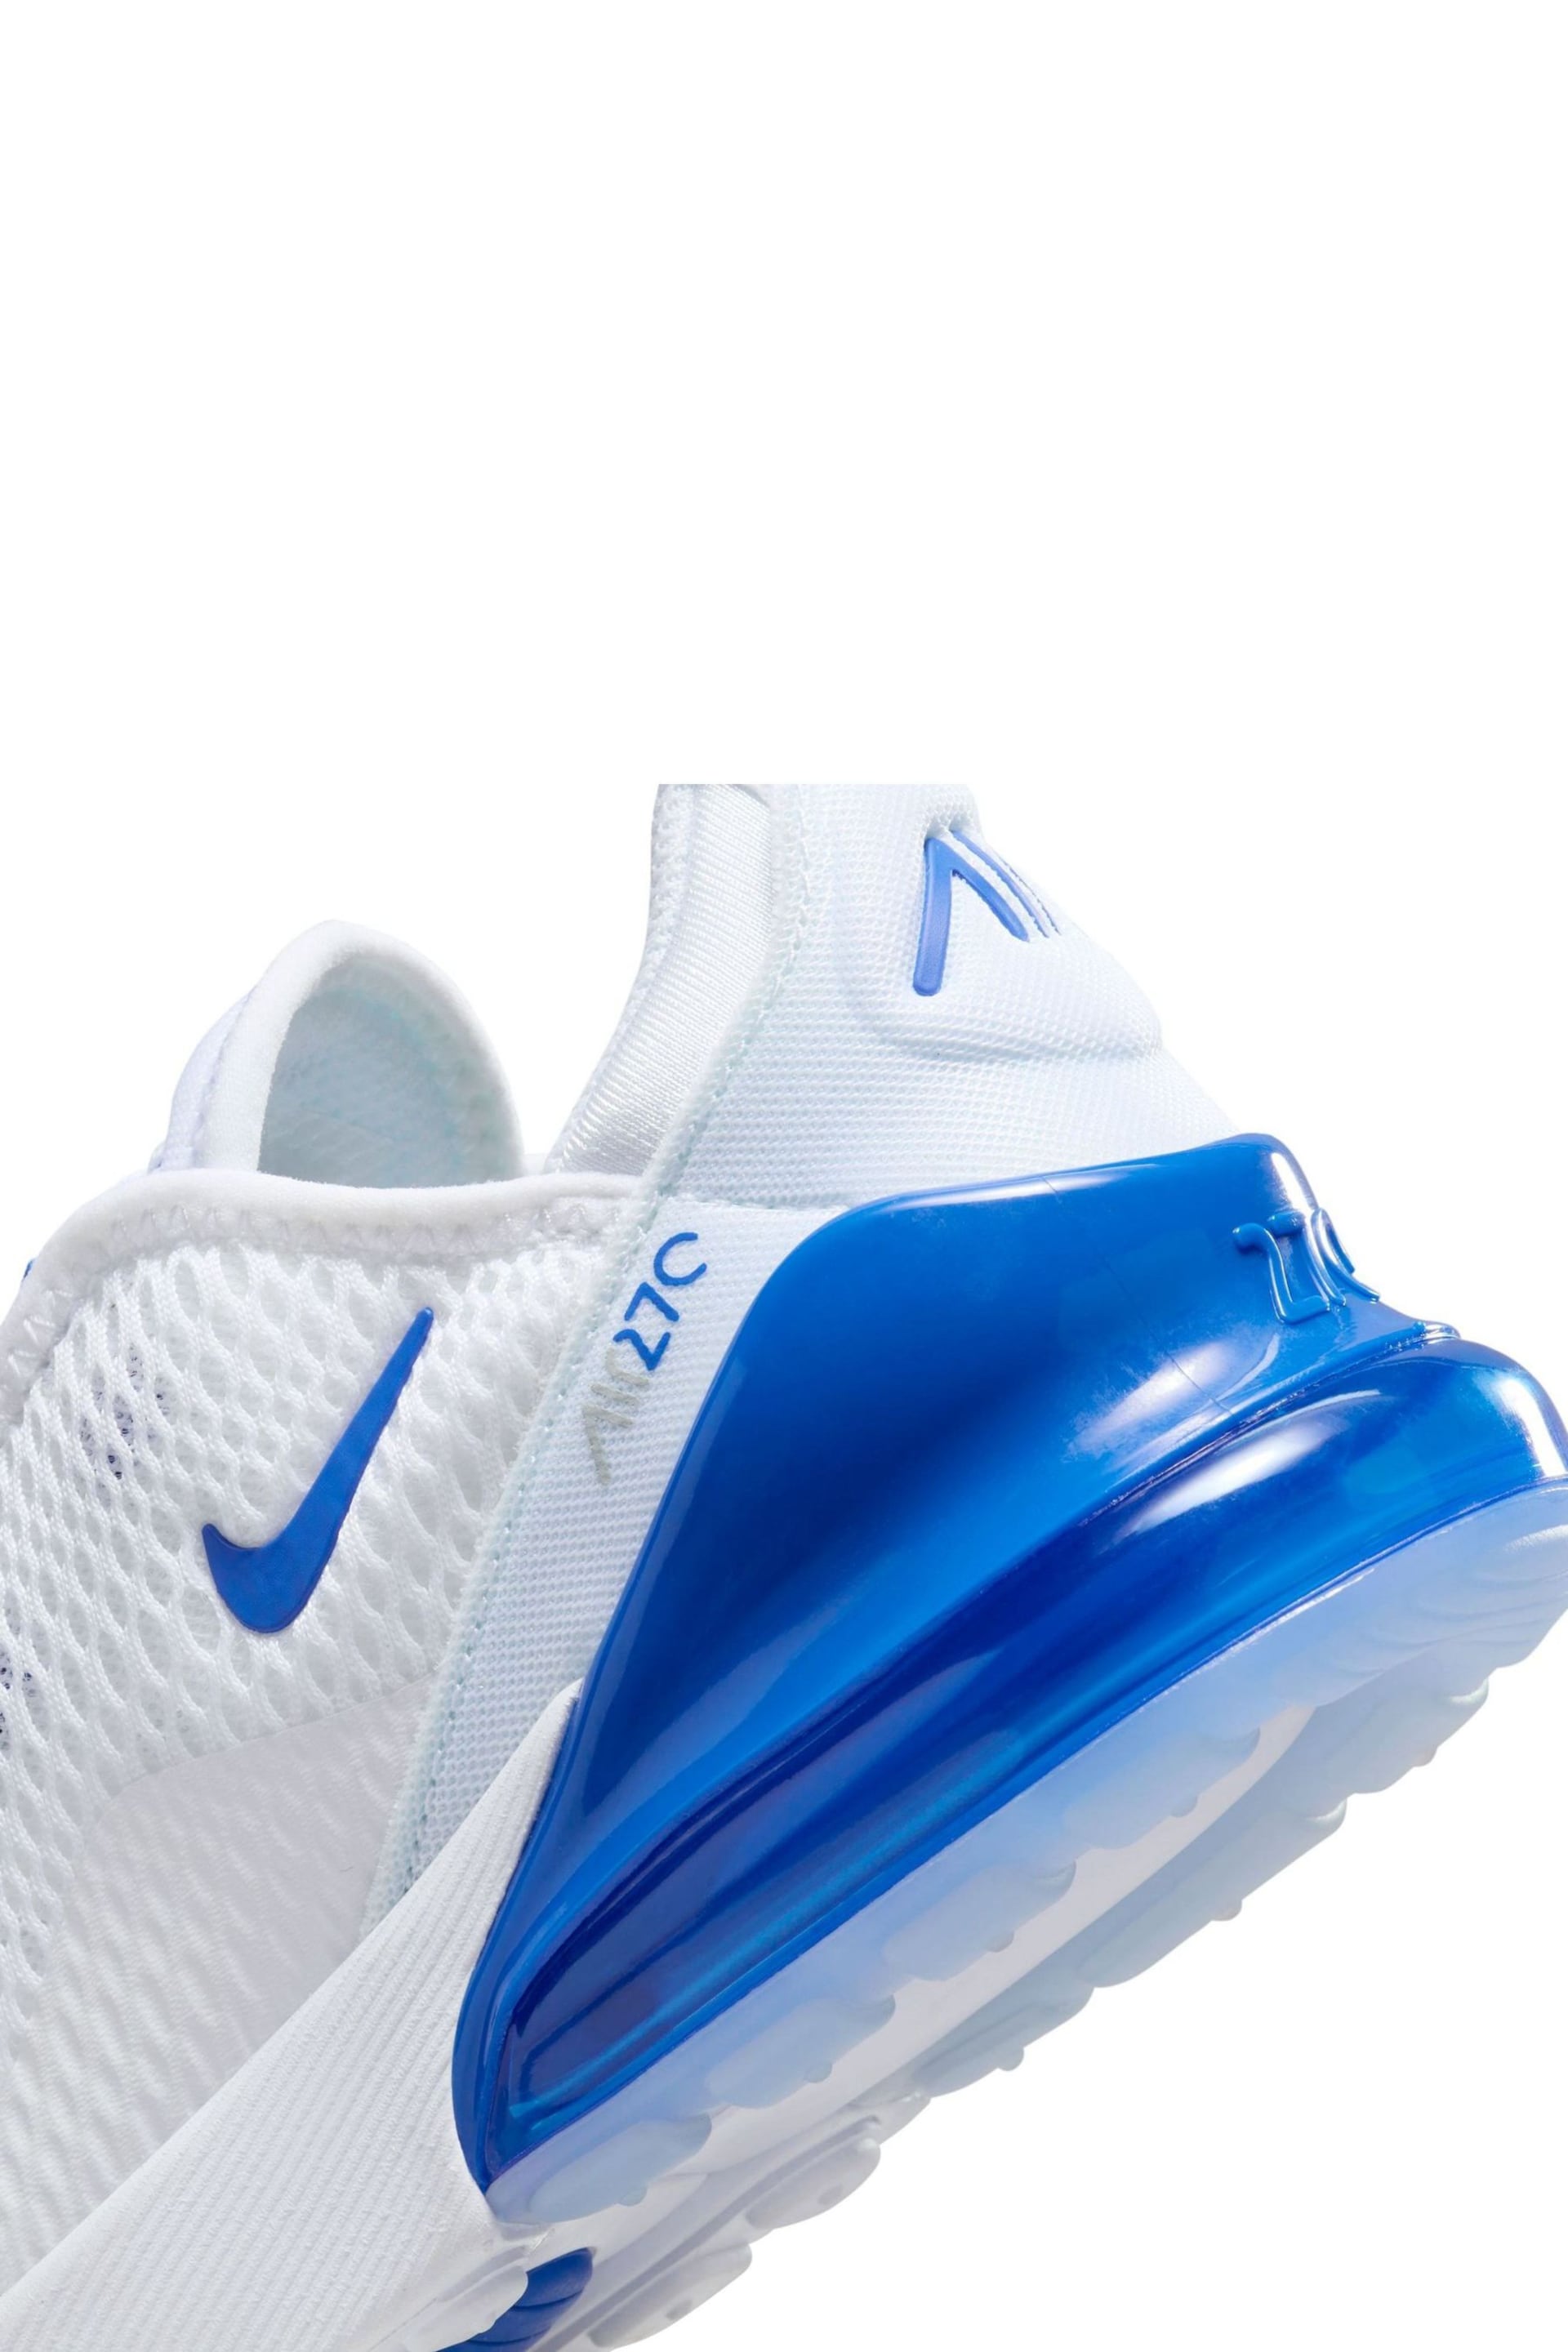 Nike White/Royal Blue Air Max 270 Junior Trainers - Image 9 of 10